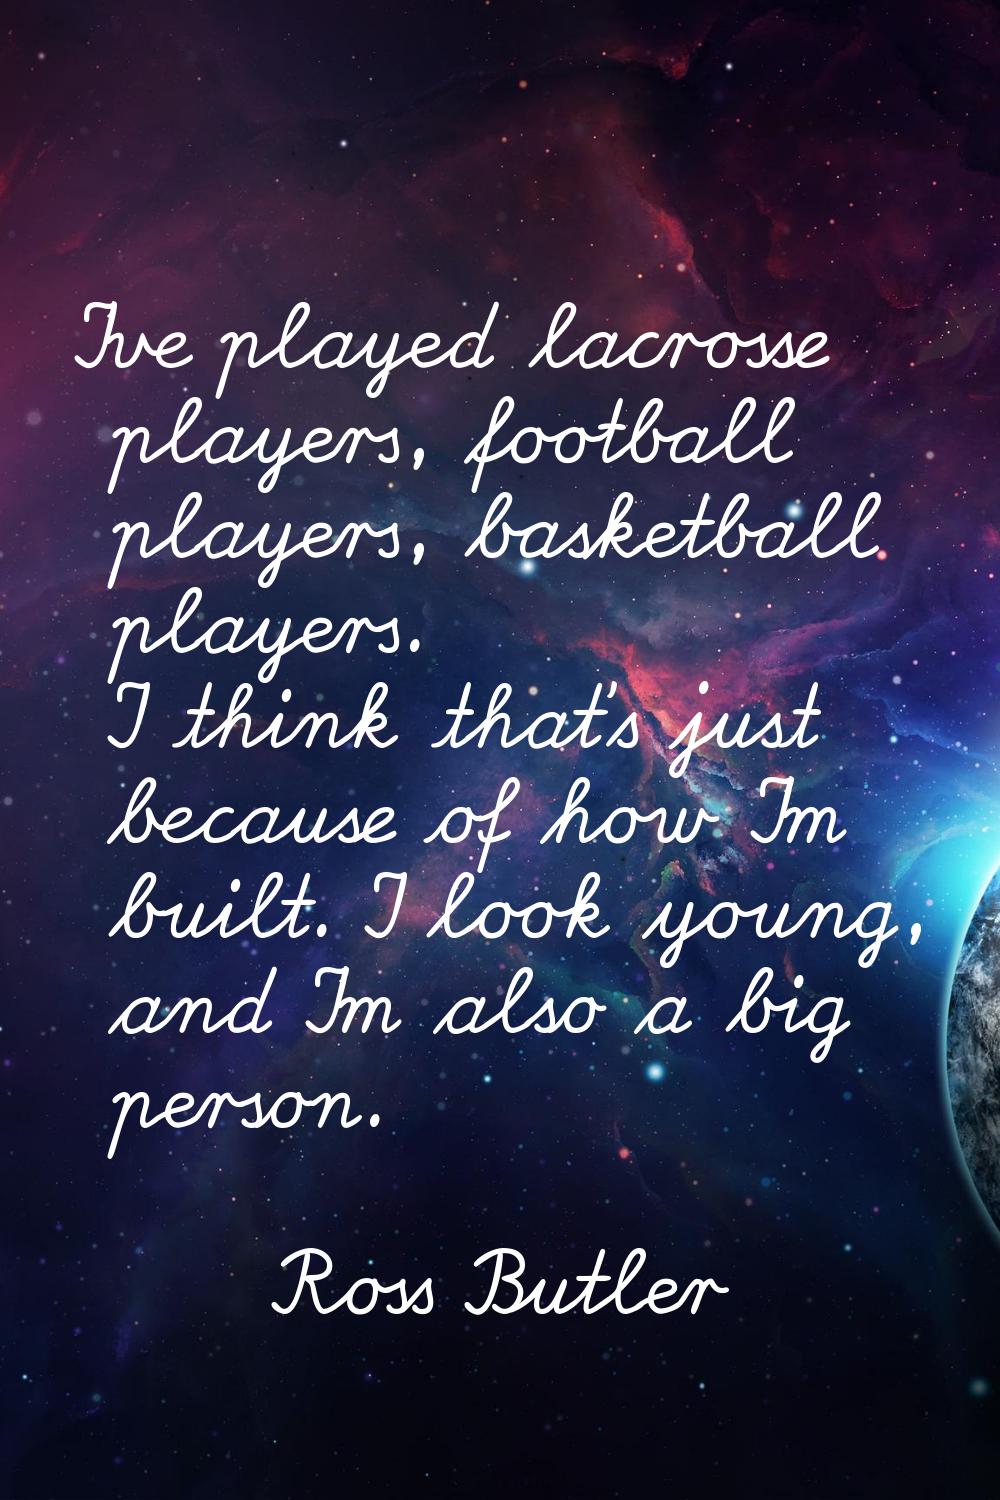 I've played lacrosse players, football players, basketball players. I think that's just because of 